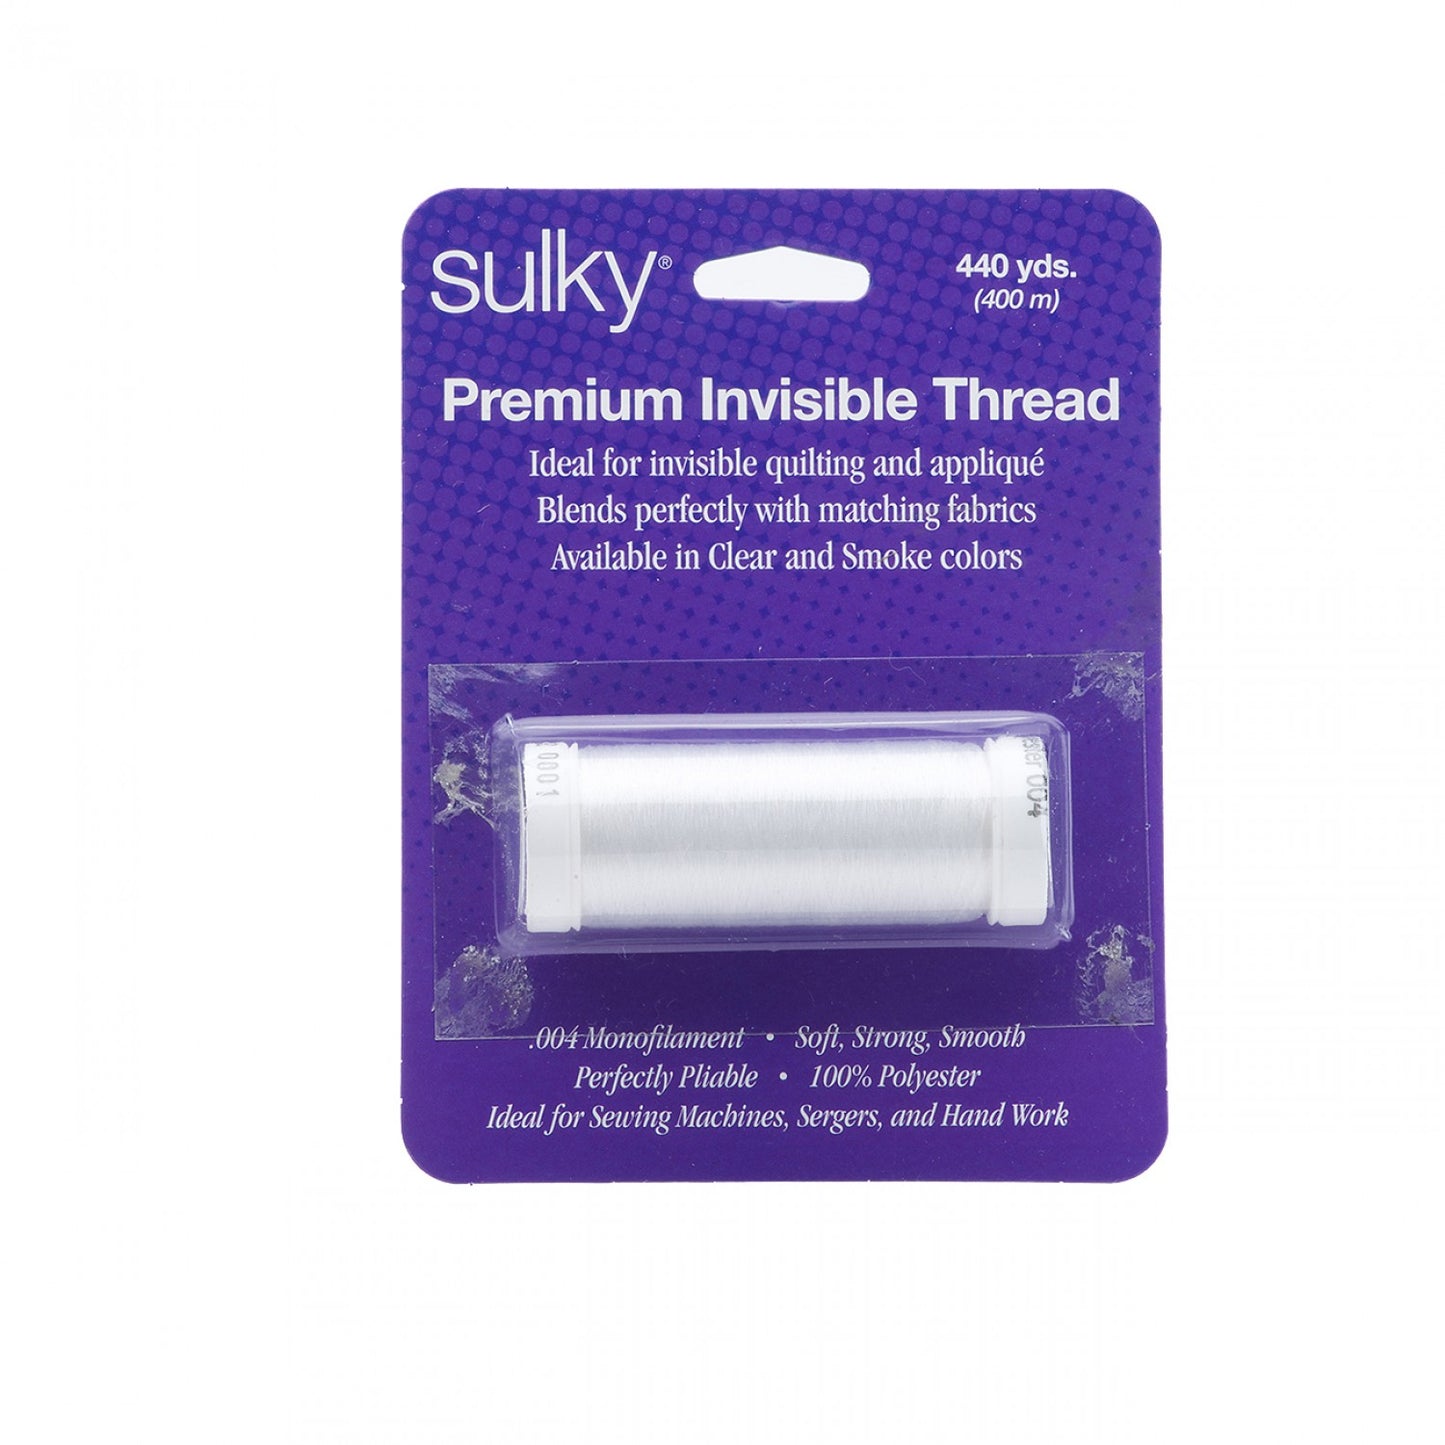 Sulky Invisible Polyester Thread .004mm 440yds Clear Carded